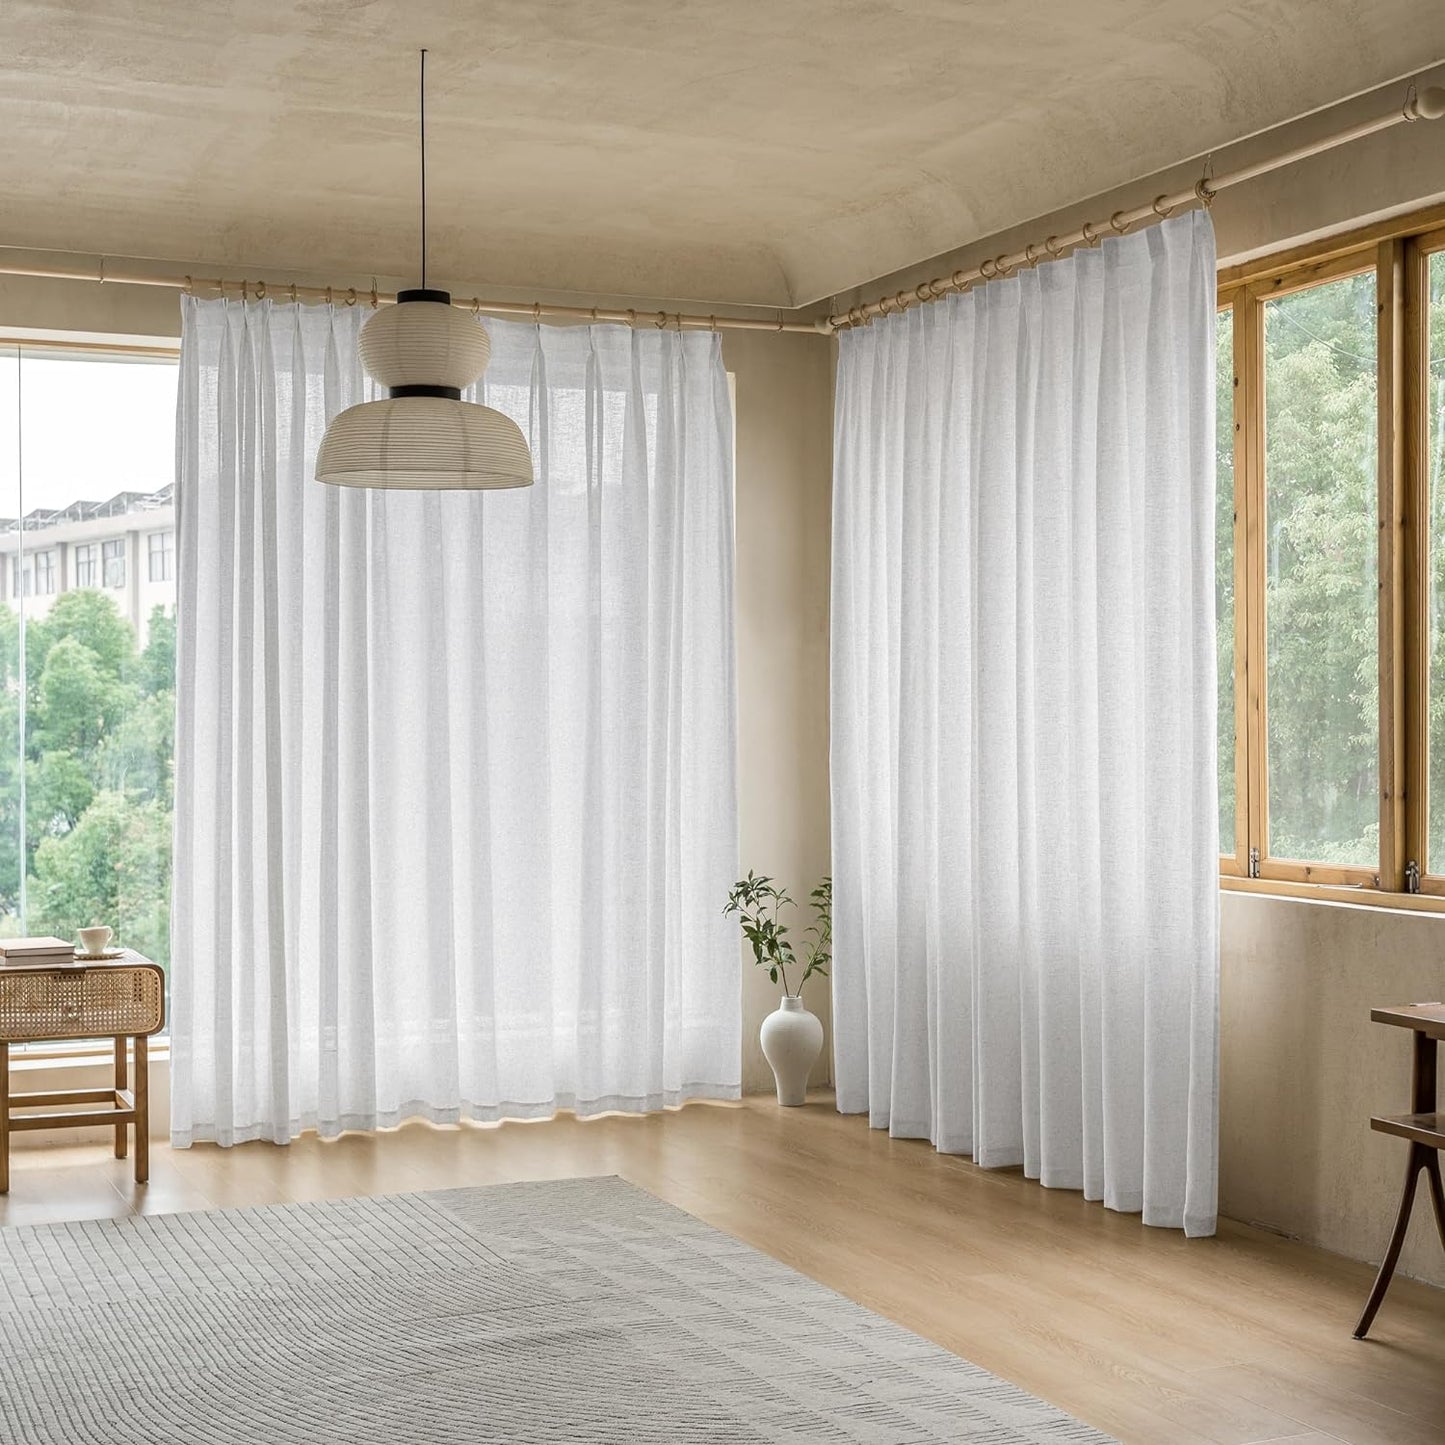 MAIHER Extra Wide Faux Linen Curtains Pinch Pleated, 108 Inches Long Light Filtering Semi Sheer Curtains Patio Door for Living Room, Pinch Pleat Drapes with Hooks (1 Panel, 84" W X 108" L)  MAIHER Beige White 84X108 